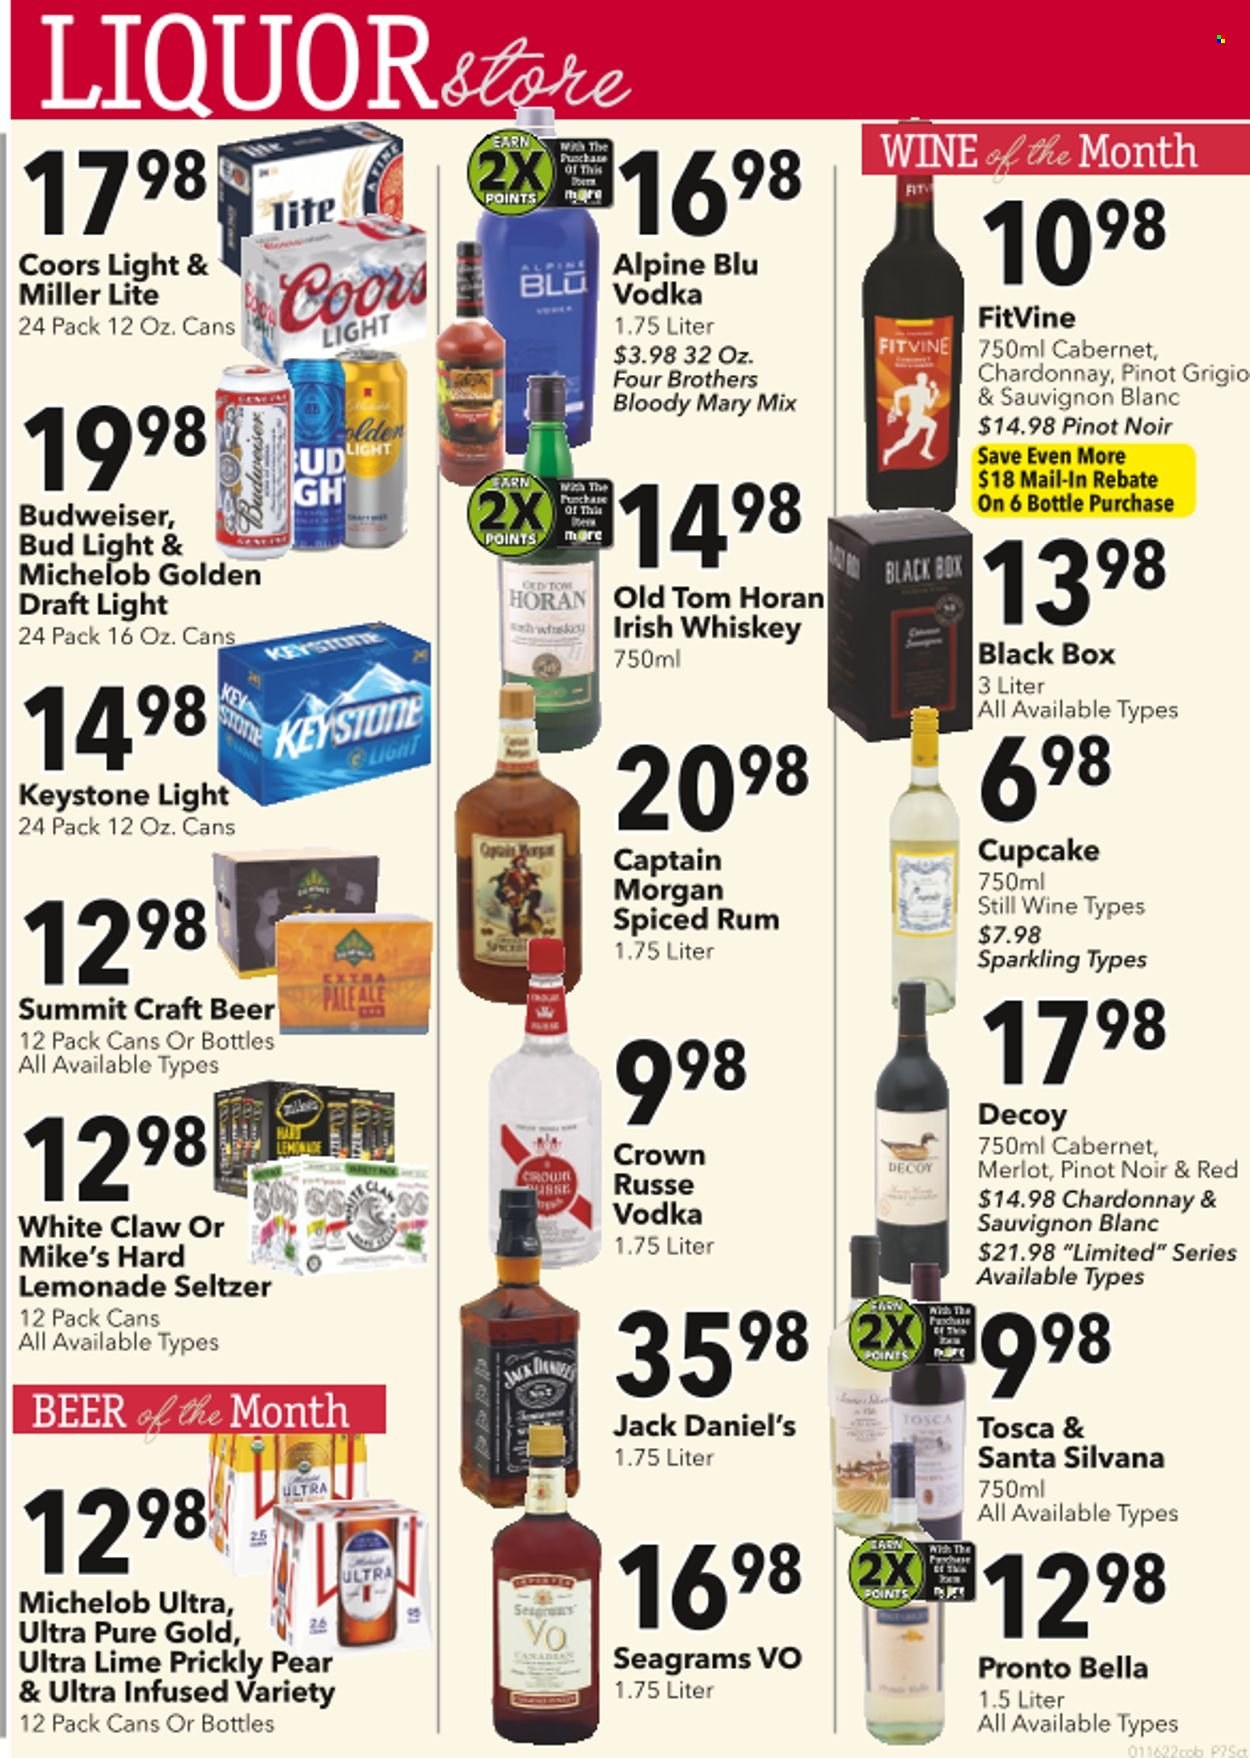 thumbnail - Coborn's Flyer - 01/19/2022 - 01/25/2022 - Sales products - cupcake, Jack Daniel's, Four Brothers, Santa, seltzer water, Cabernet Sauvignon, red wine, white wine, Chardonnay, wine, Merlot, Pinot Noir, Pinot Grigio, Sauvignon Blanc, Captain Morgan, rum, spiced rum, vodka, whiskey, irish whiskey, liquor, White Claw, whisky, beer, Bud Light, Keystone, Budweiser, Miller Lite, Coors, Michelob. Page 1.